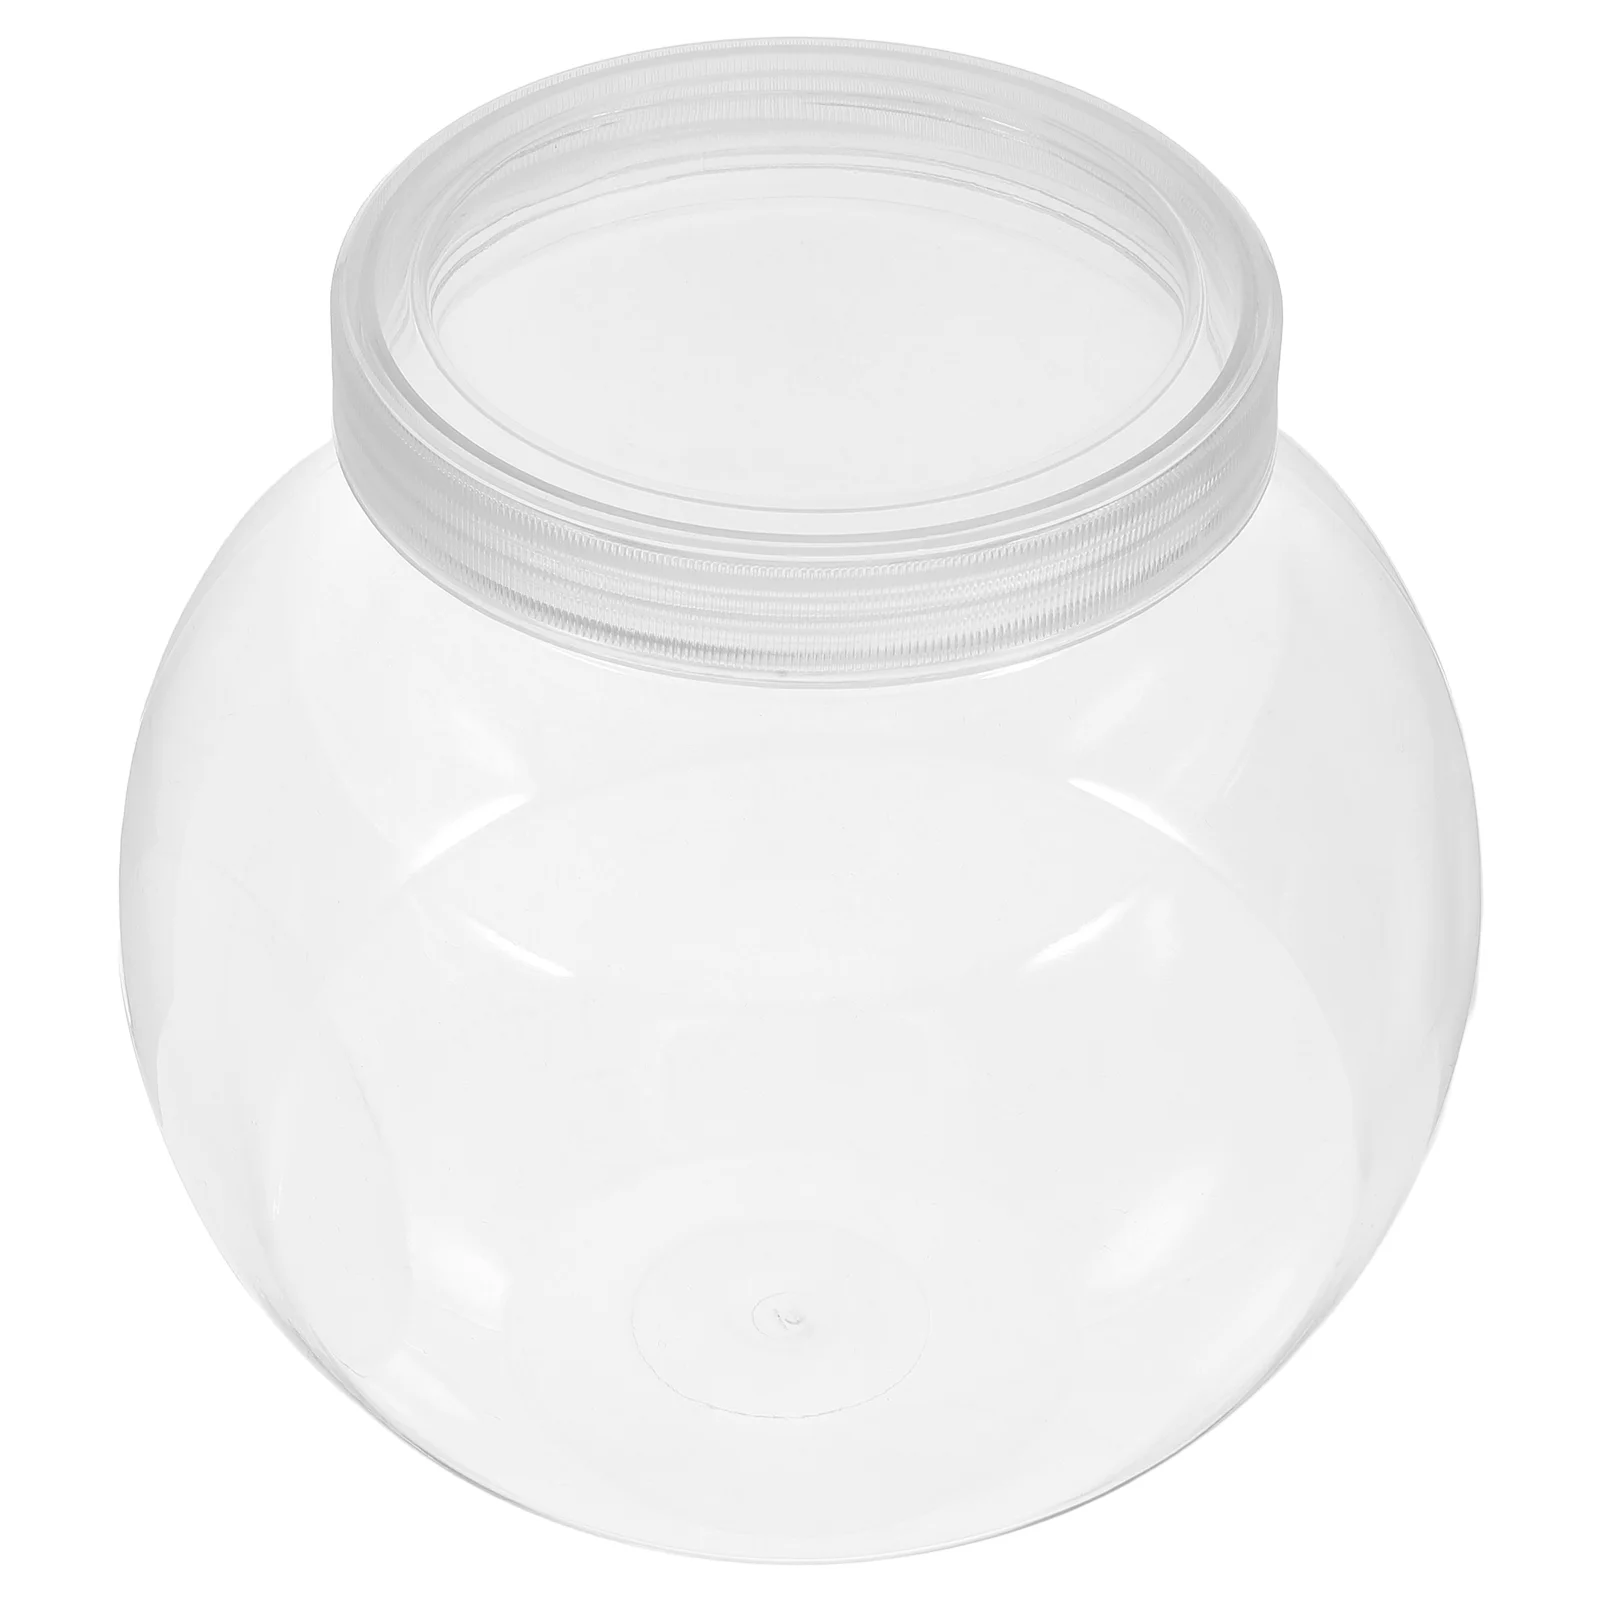 

Household Dried Food Jar Snack Holder Plastic Sweet Jars Small Cookie Container Candy Lids Containers